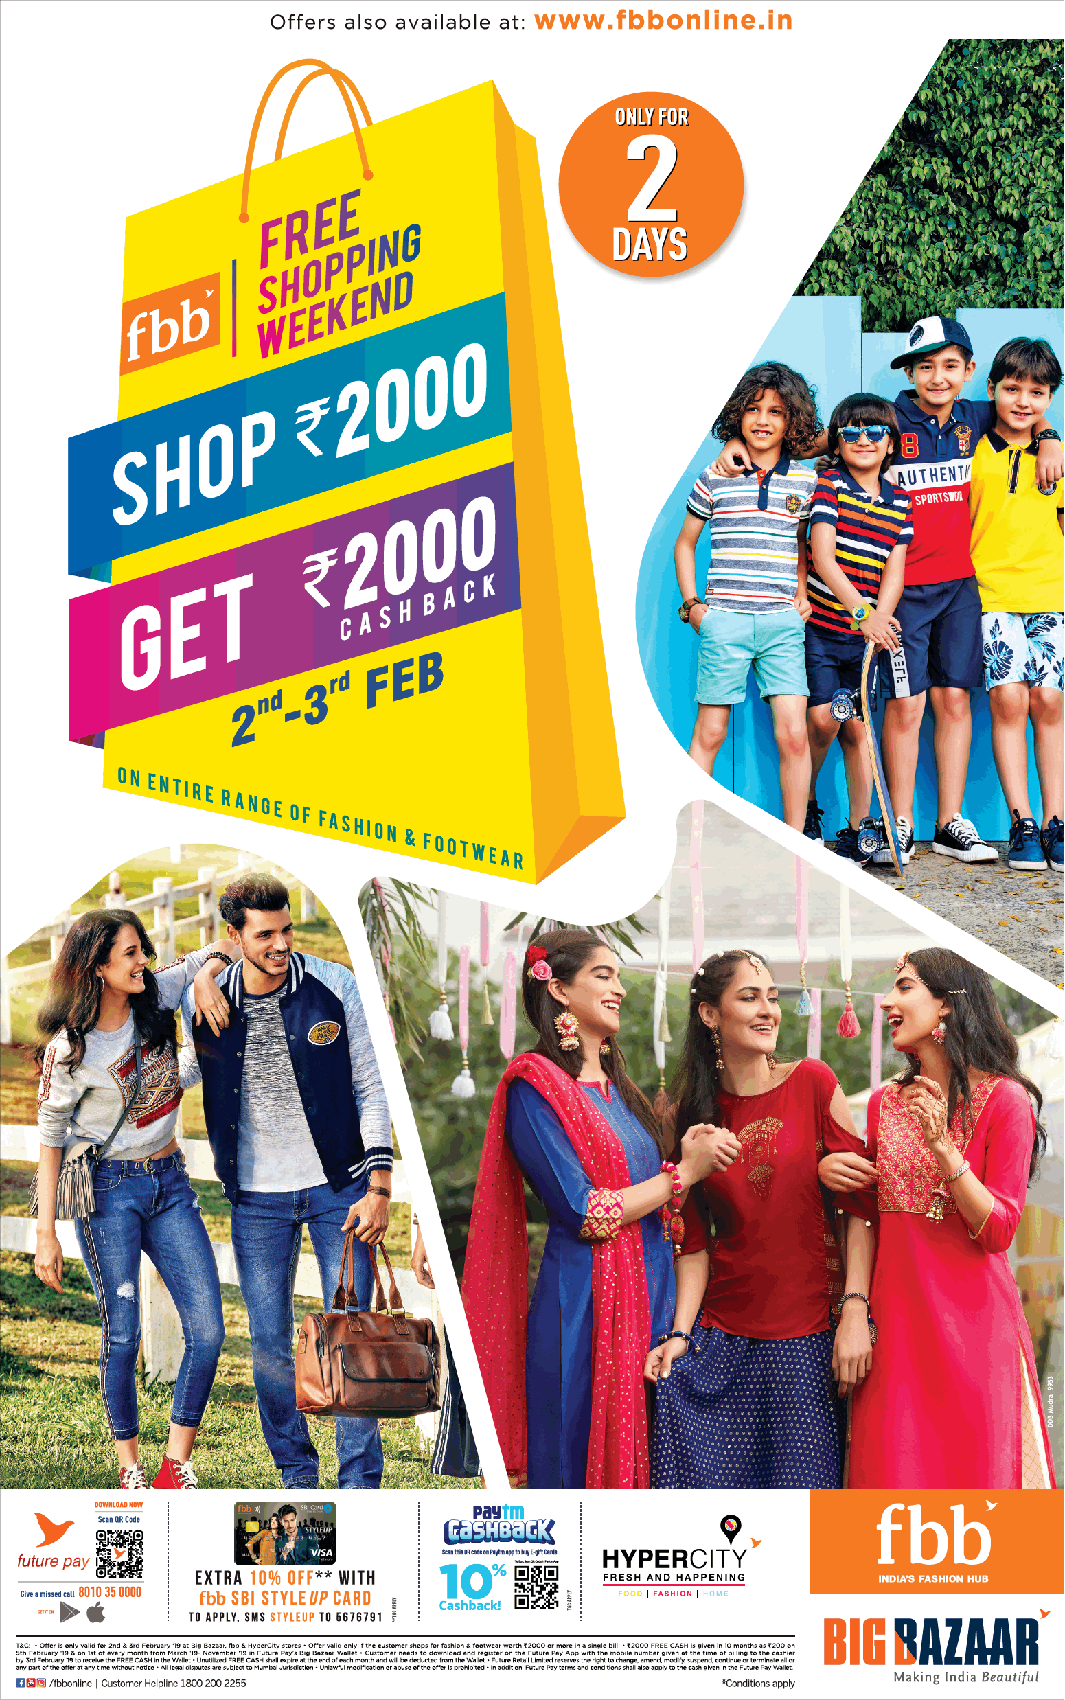 fashion-big-bazaar-free-shopping-weekend-shop-rs-2000-get-rs-2000-cashback-ad-bombay-times-02-02-2019.png